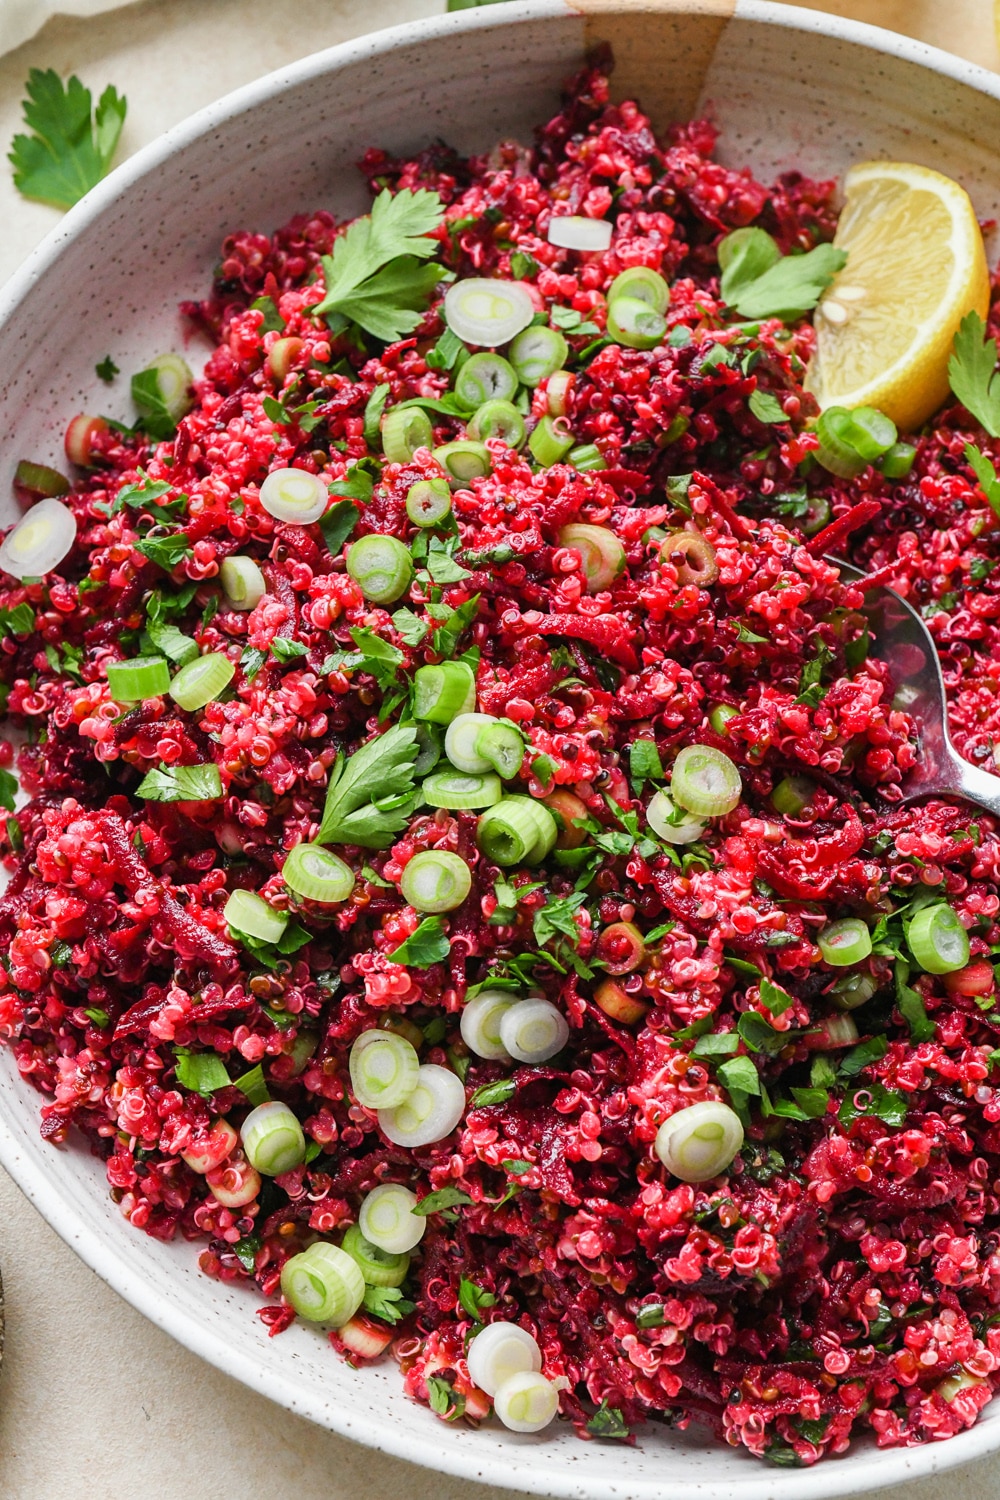 Quinoa and beet salad in a large shallow ceramic serving dish. The salad is garnished with sliced green onion, fresh chopped parsley, and lemon wedges on the side.